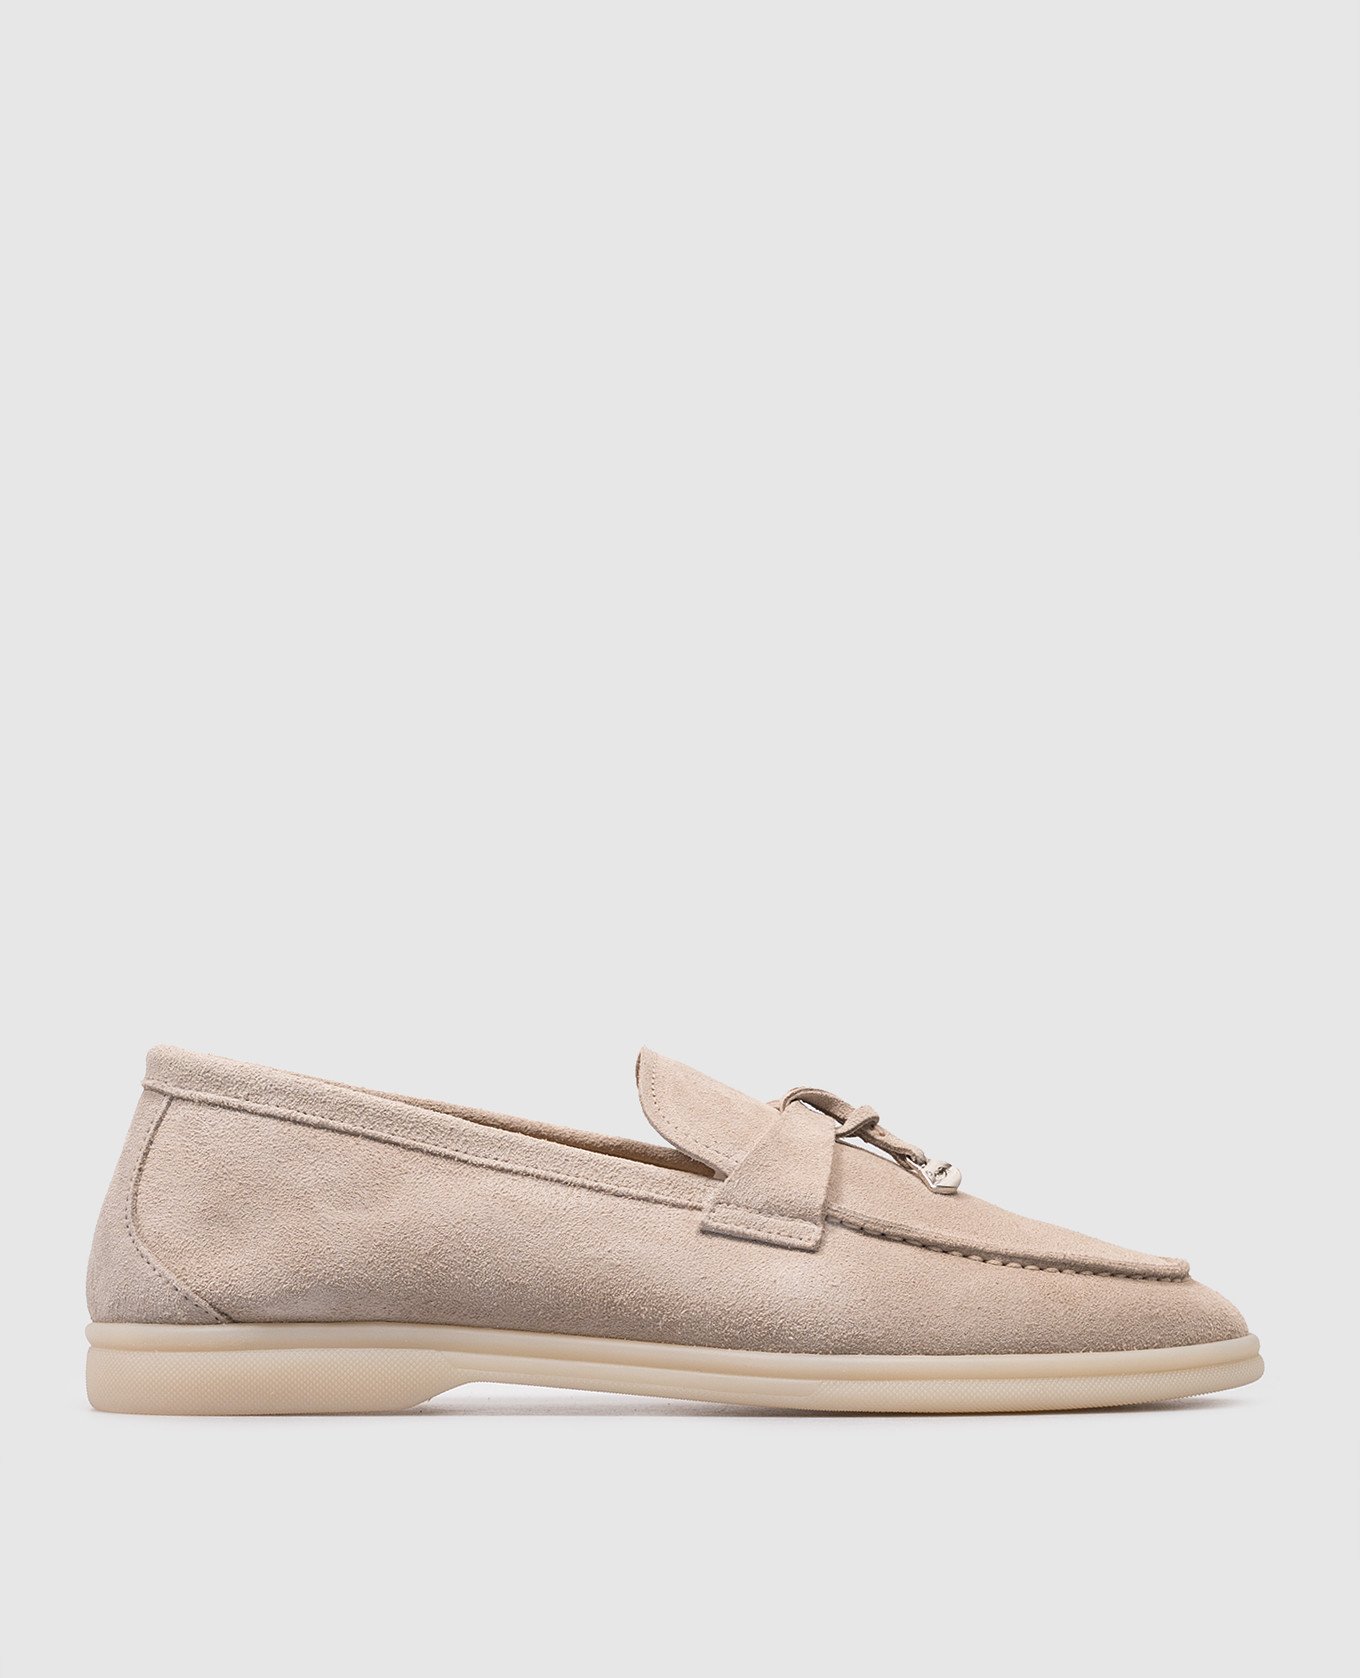 Beige suede loafers with metallic logo